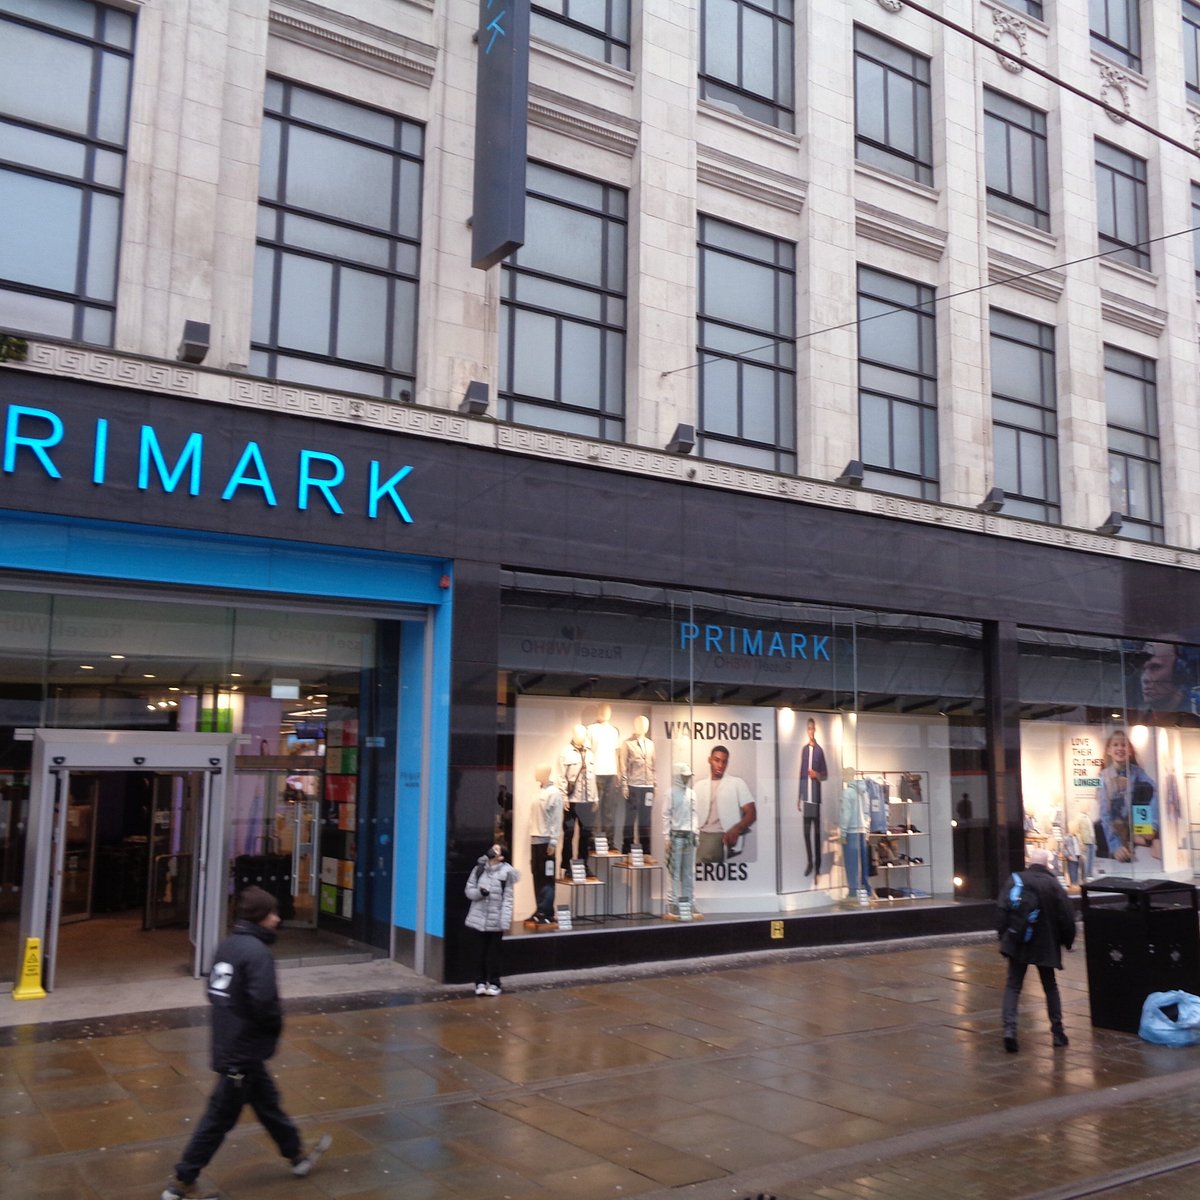 Stay warm with Primark – Chantelle M